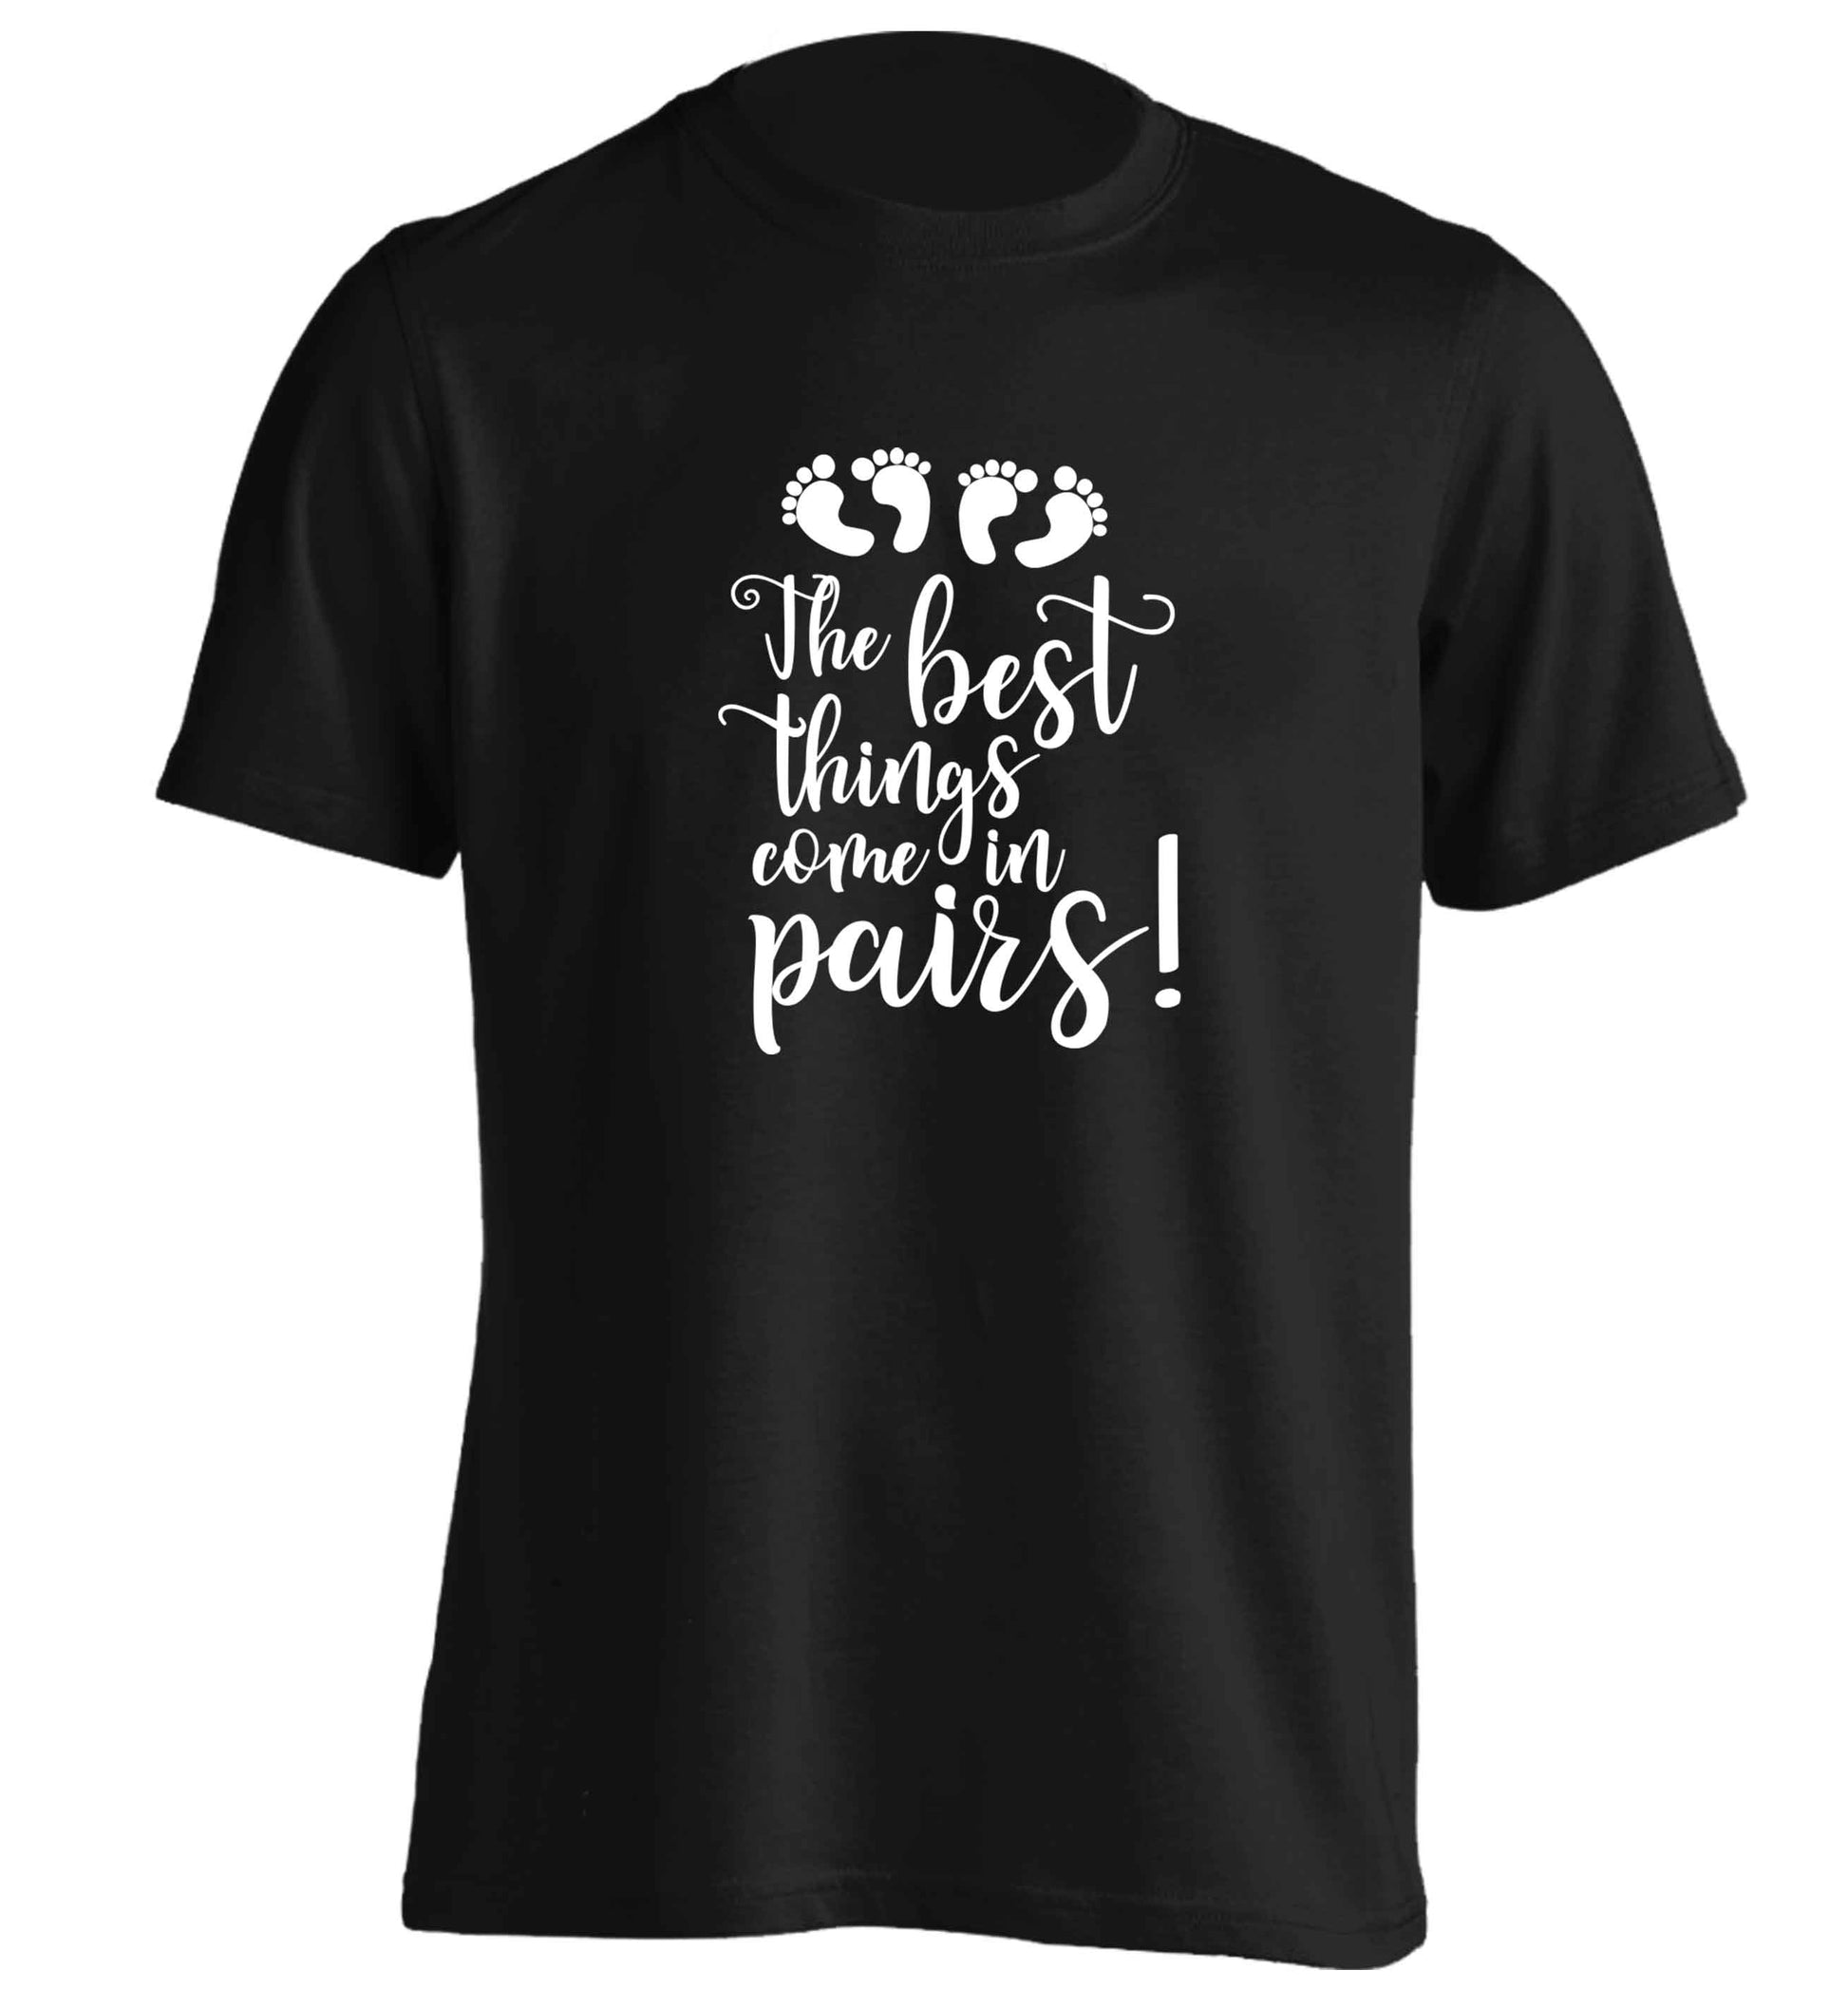 The best things come in pairs! adults unisex black Tshirt 2XL